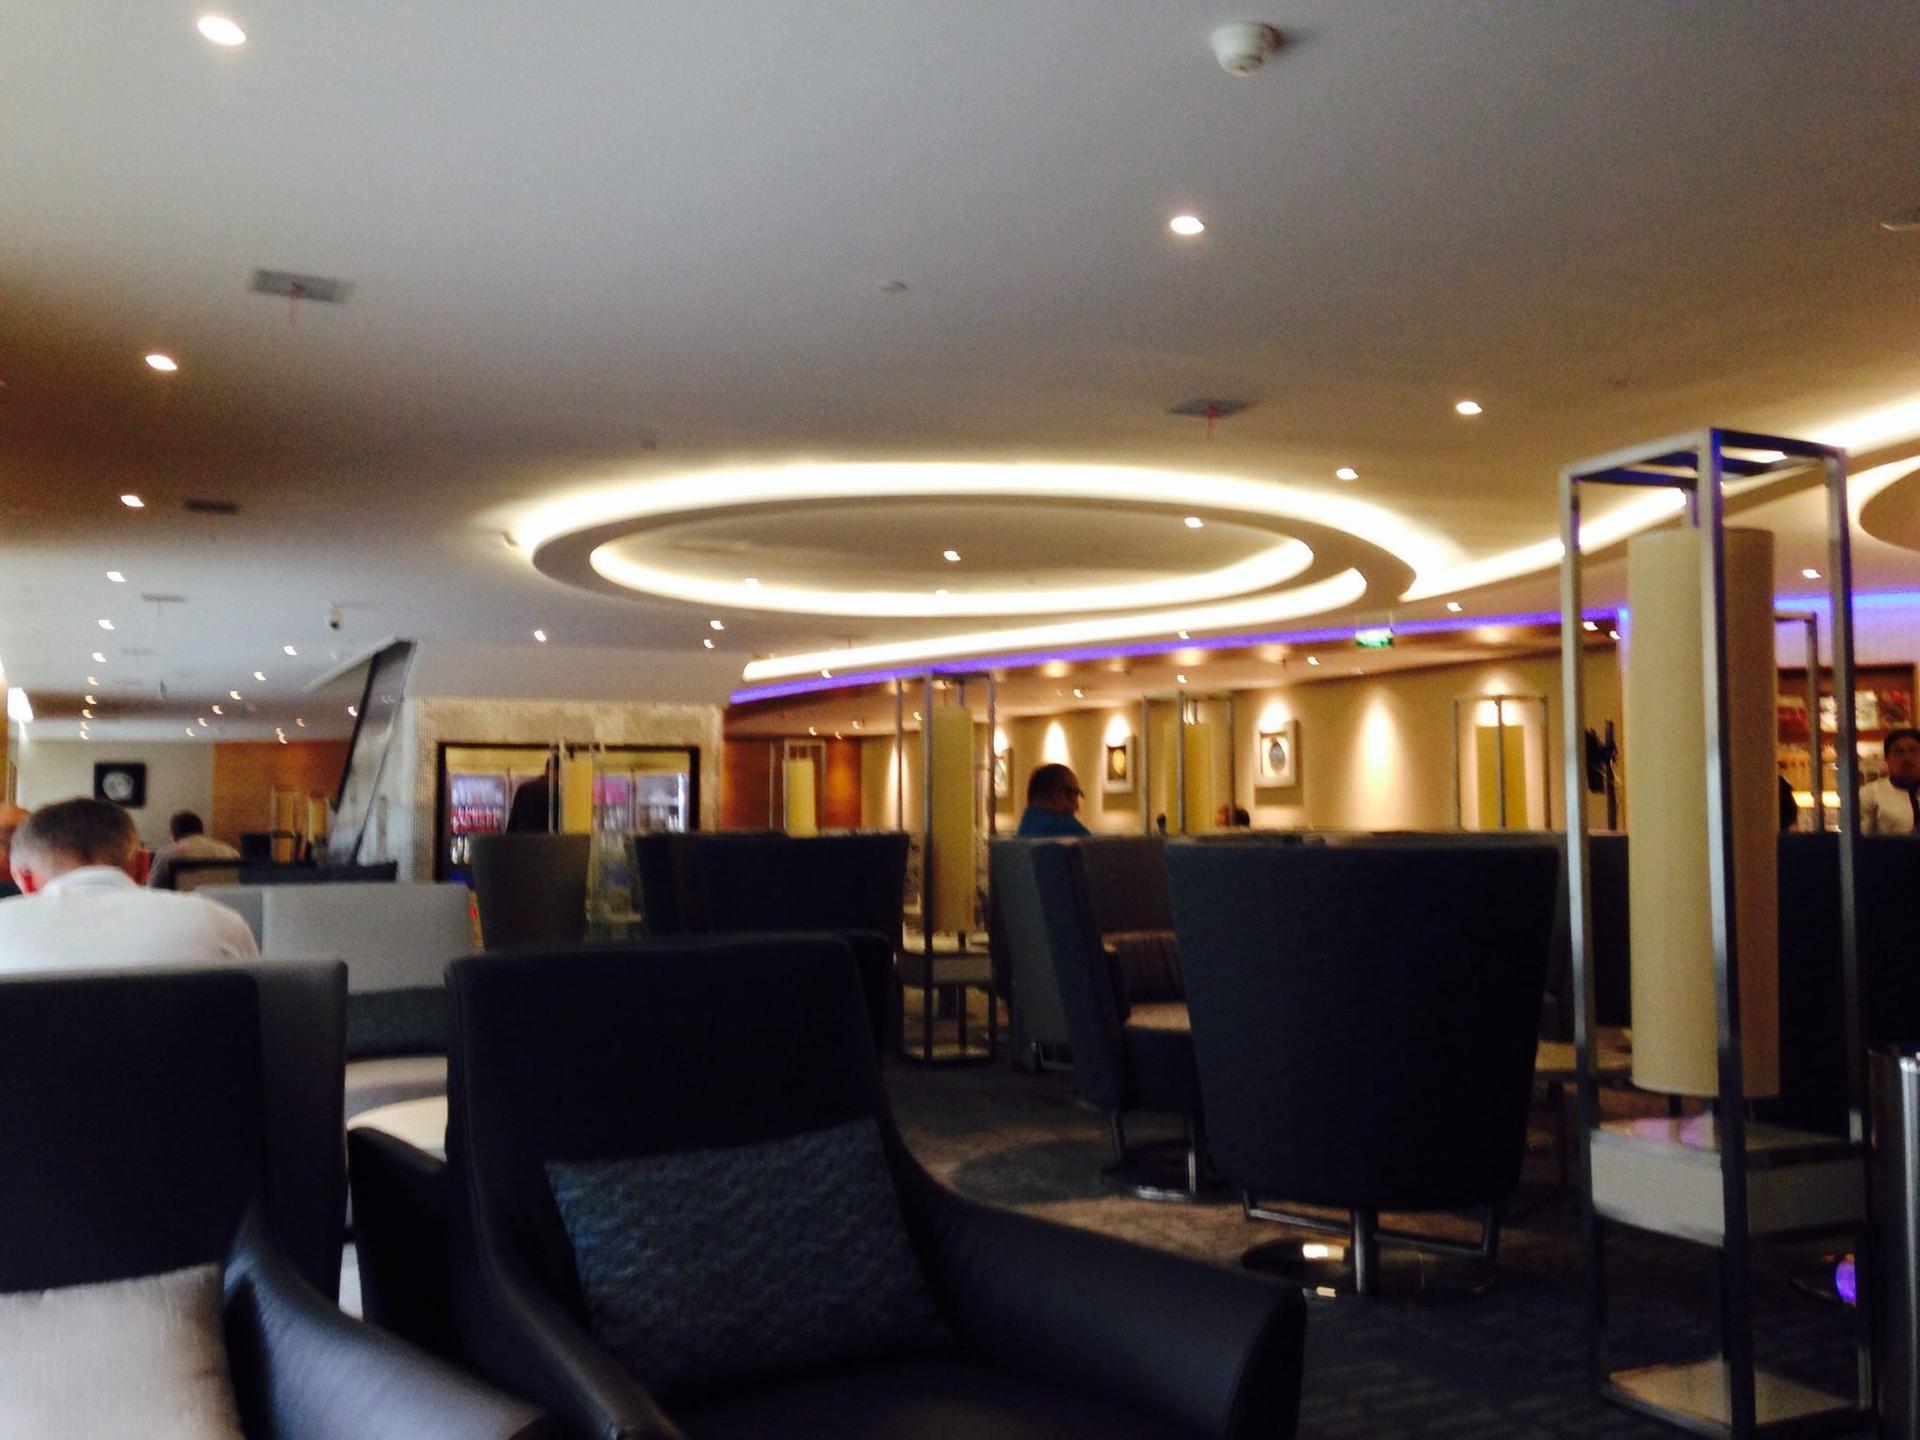 No. 71 Air China Business Class Lounge image 5 of 9